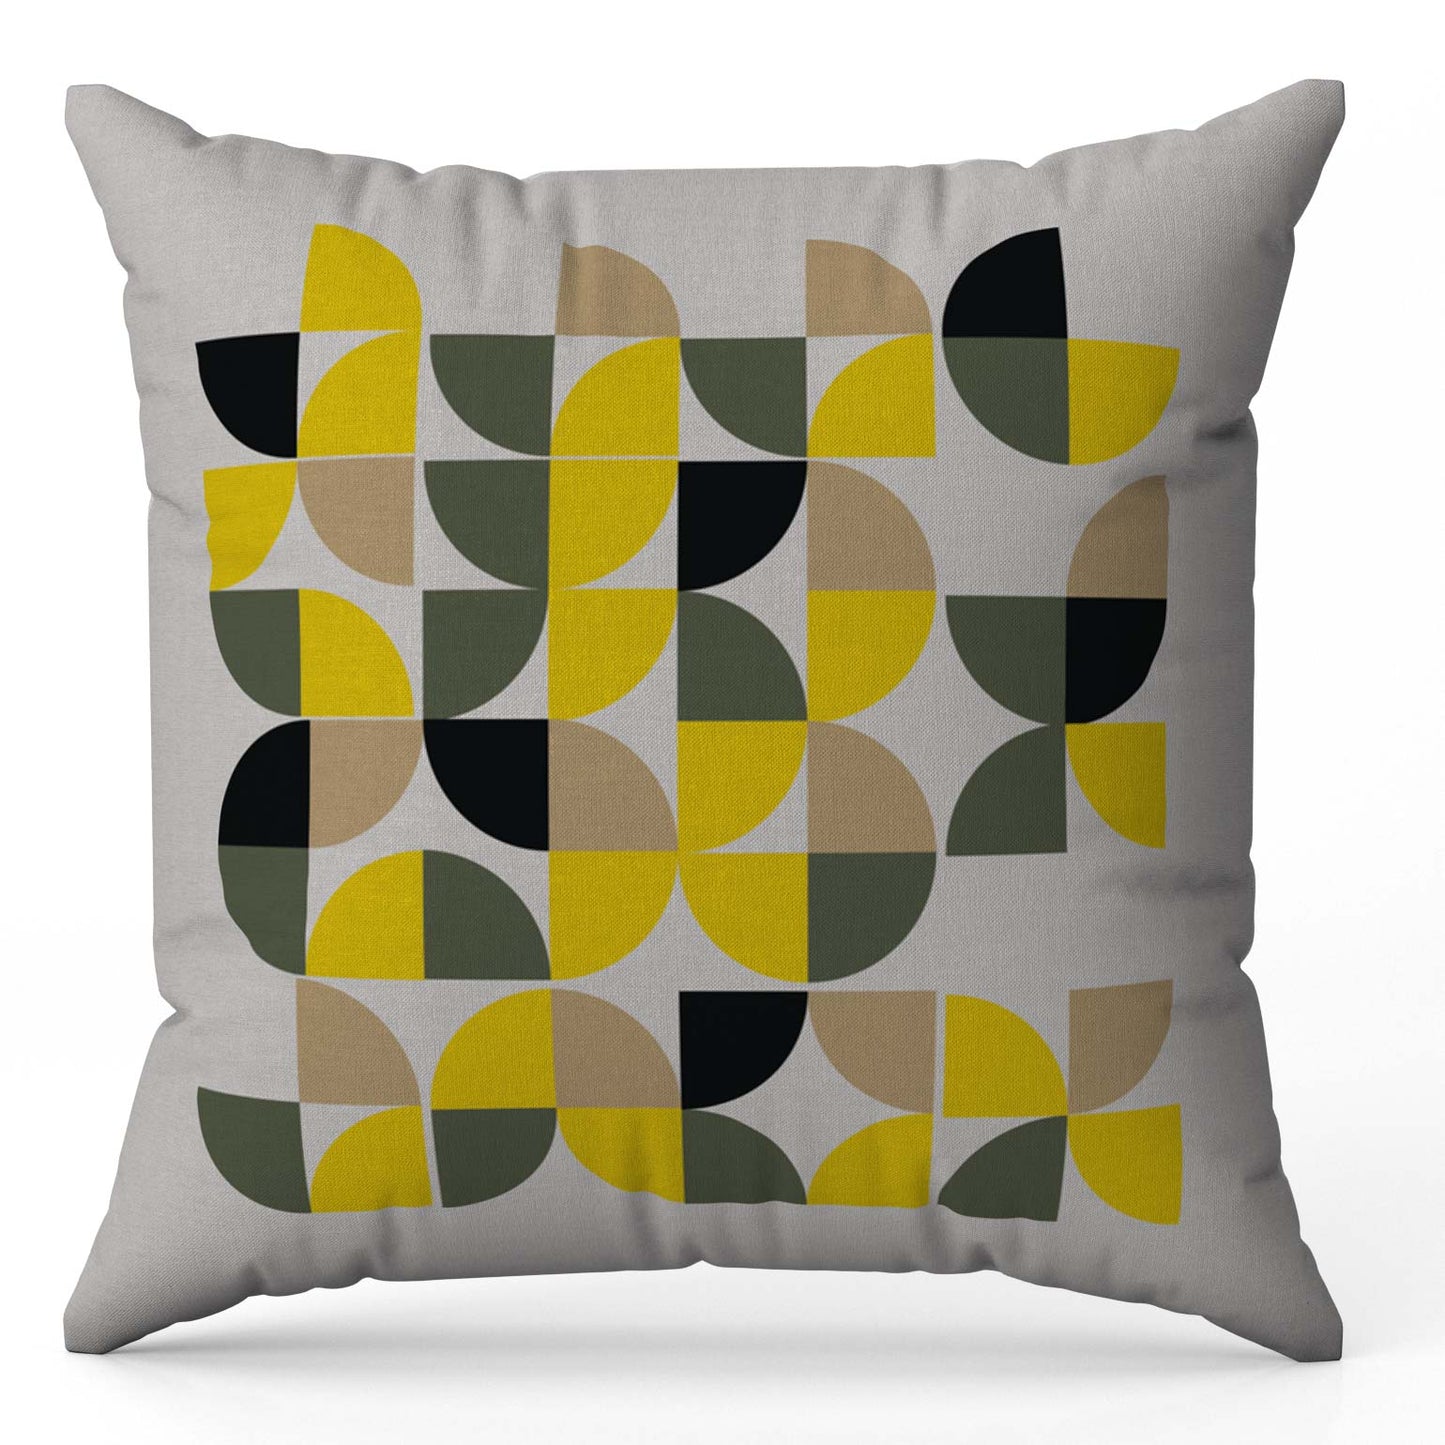 Munick Vogue Cushion Cover Trendy Home